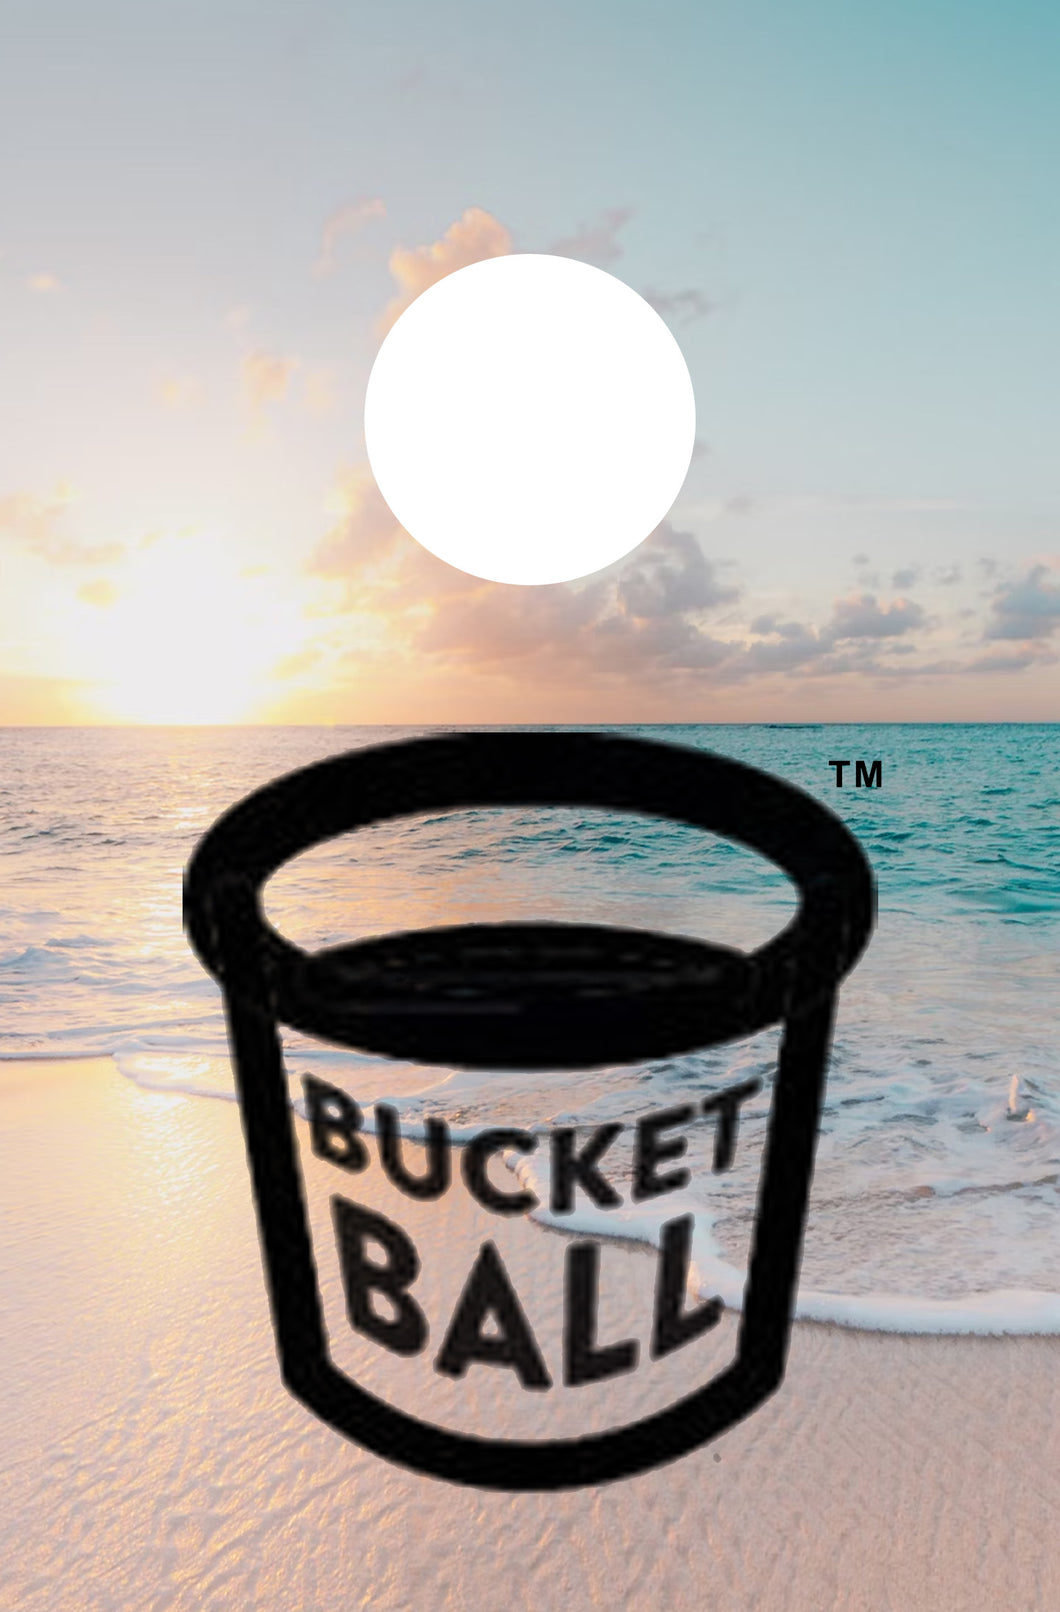 Bucket Ball branded CoinToss board game